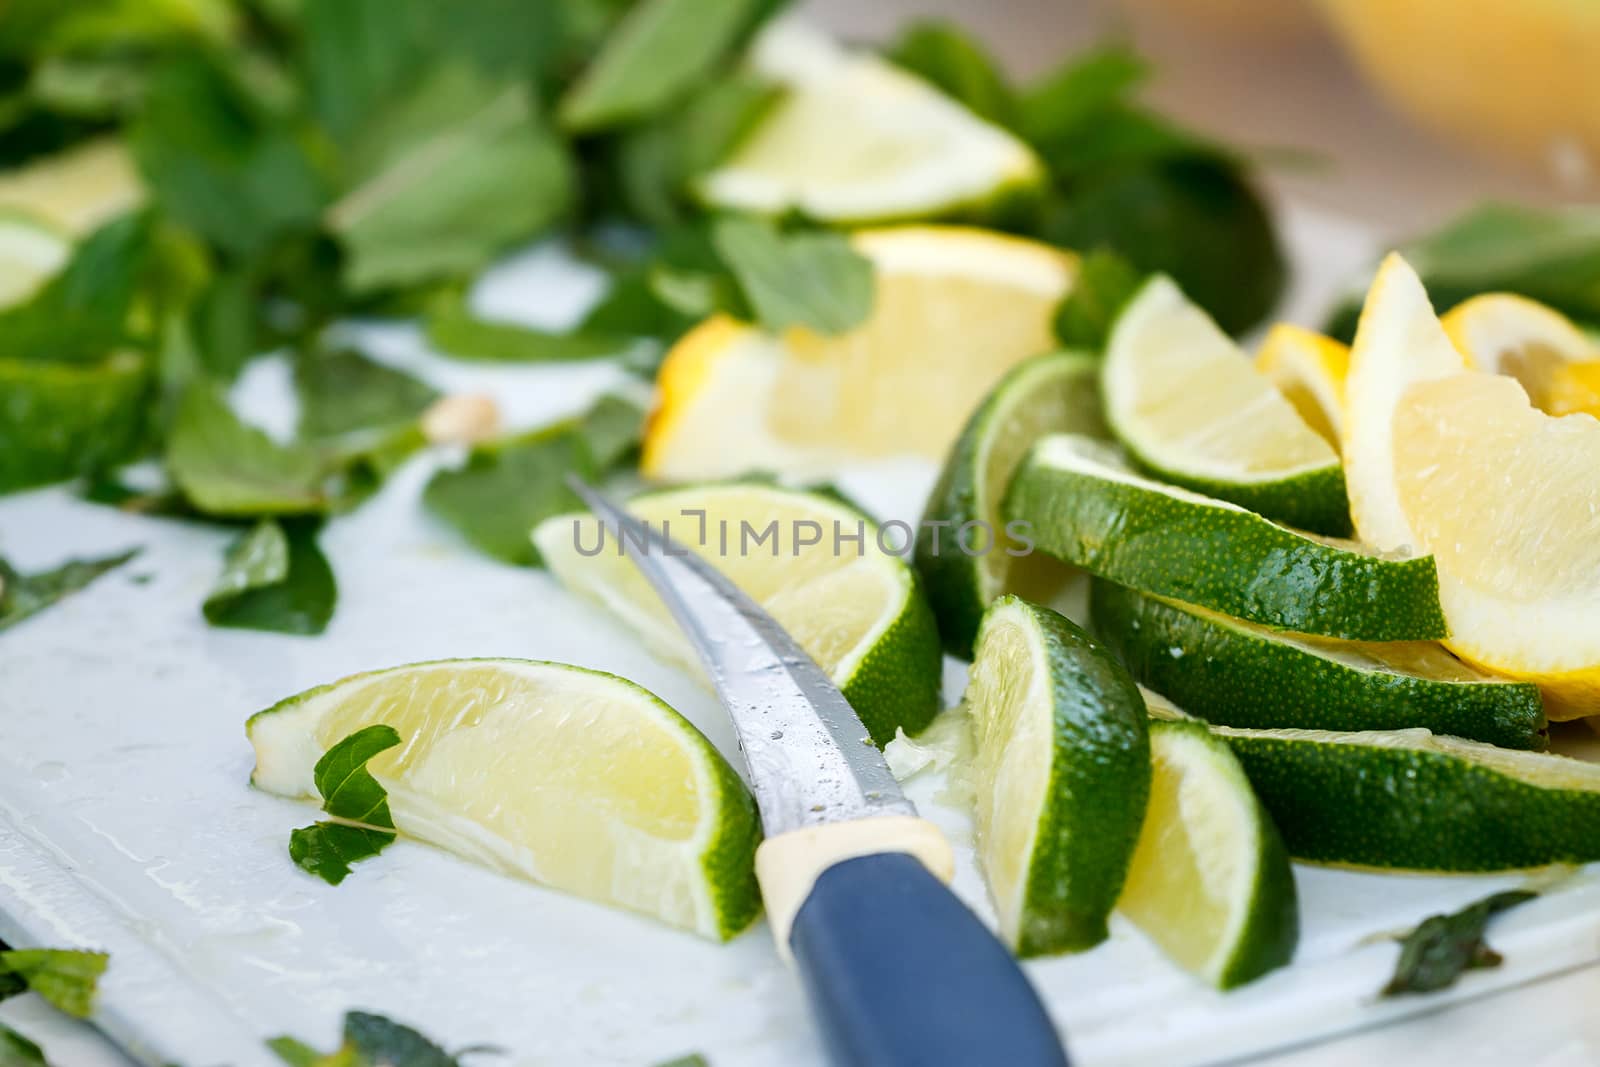 Ingredients for a refreshing mojito cocktail. Close-up